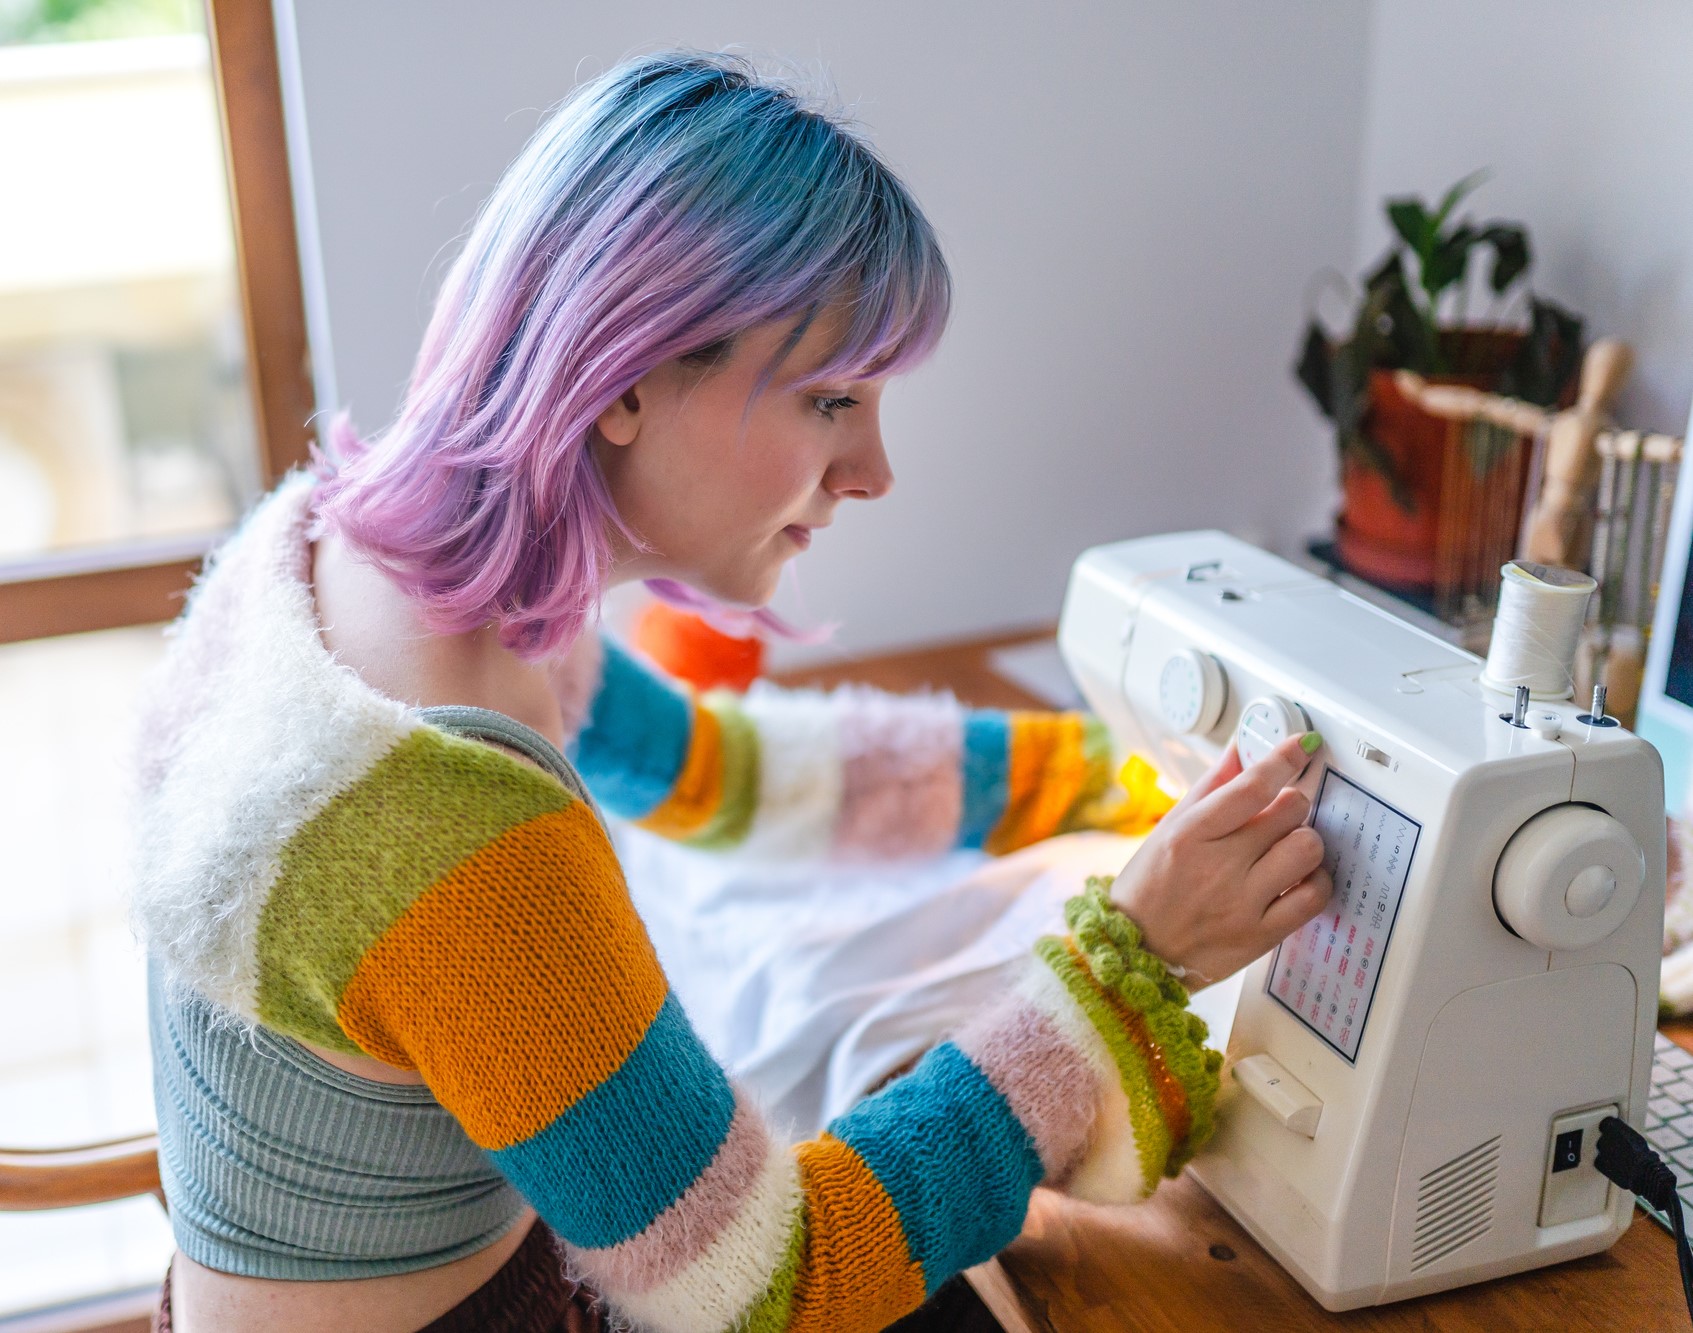 Person with blue and pink hair adjusting a dial on a sewing machine